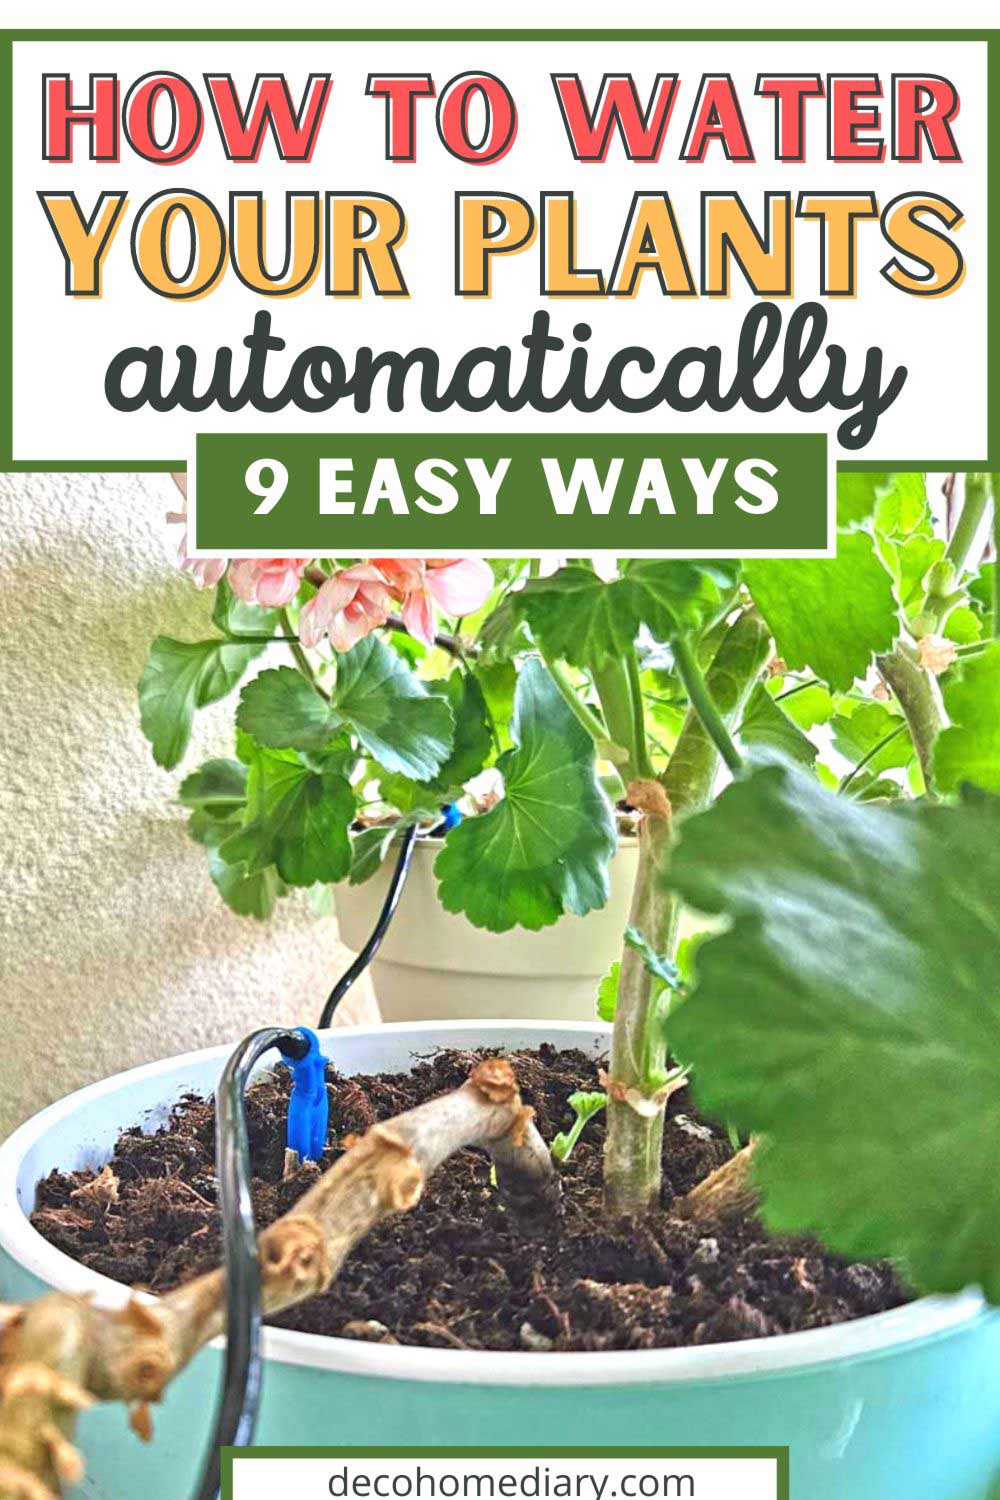 how to automatically water potted plants - pin